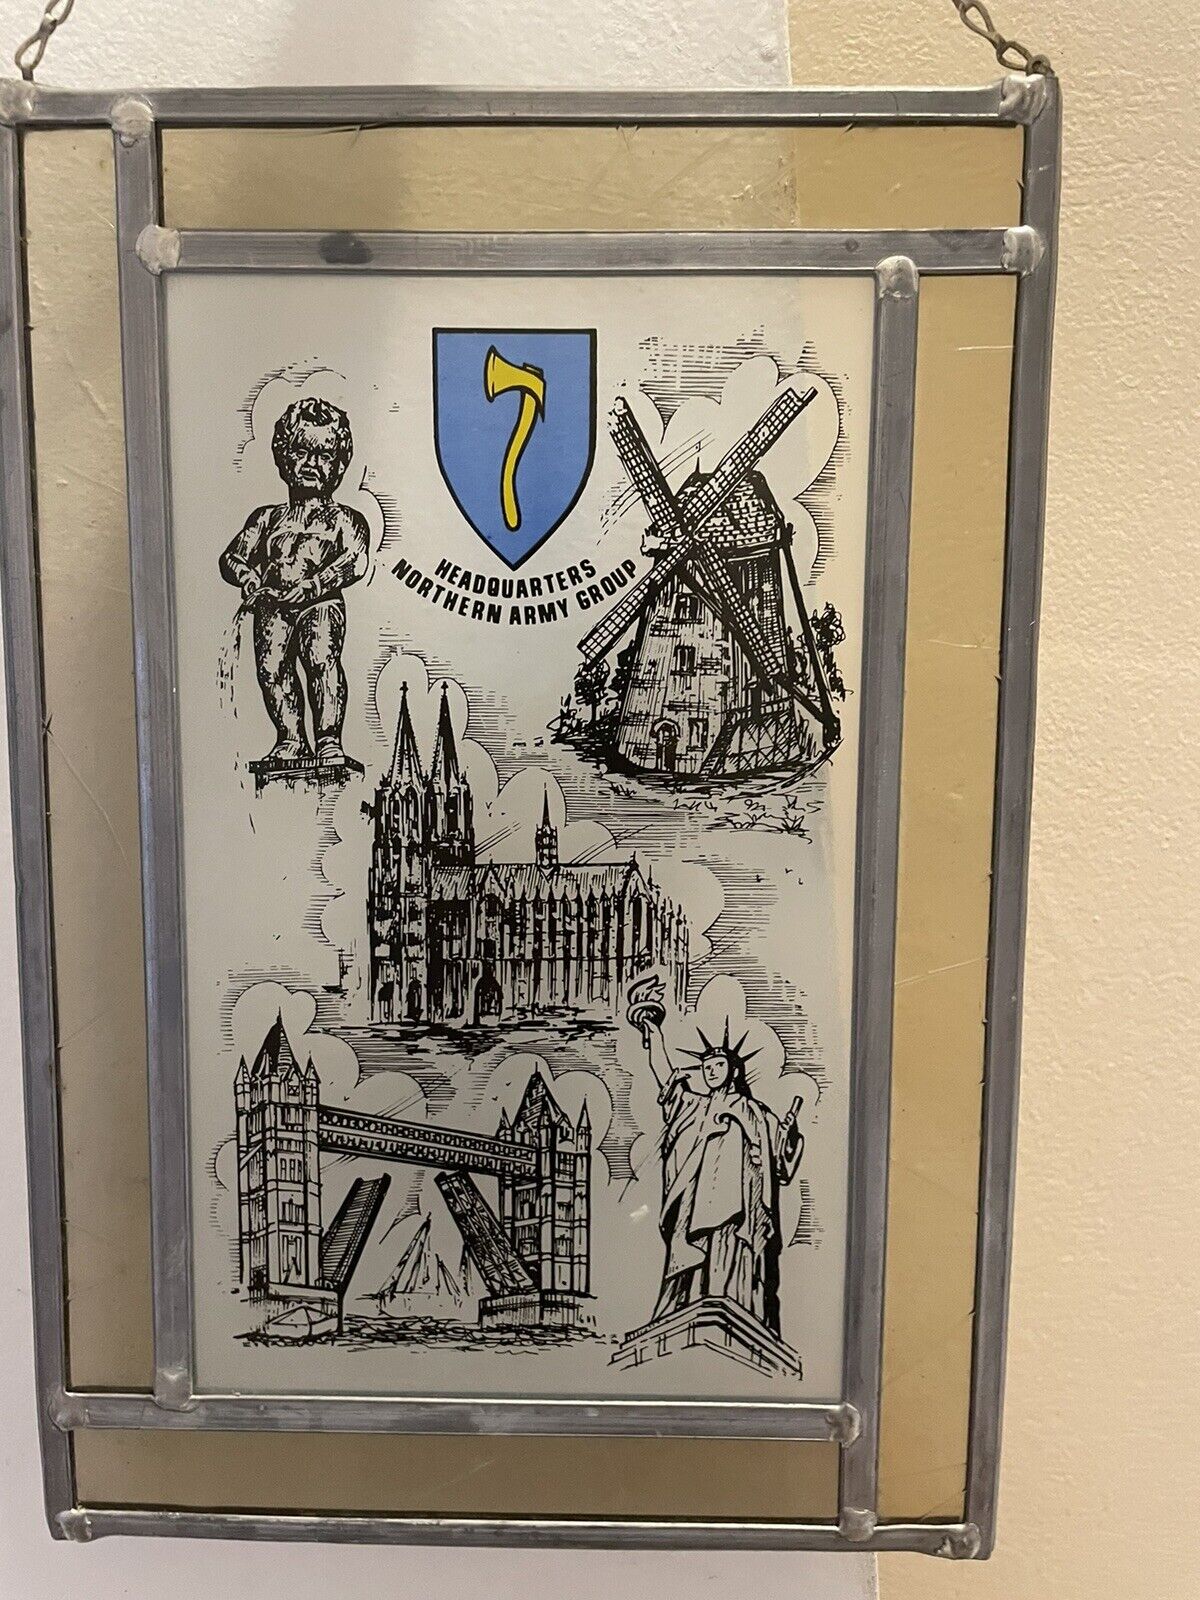 Rare 1950s NATO Northern Army Group Stained Glass Frame Landmarks 11 1/2” by 8”